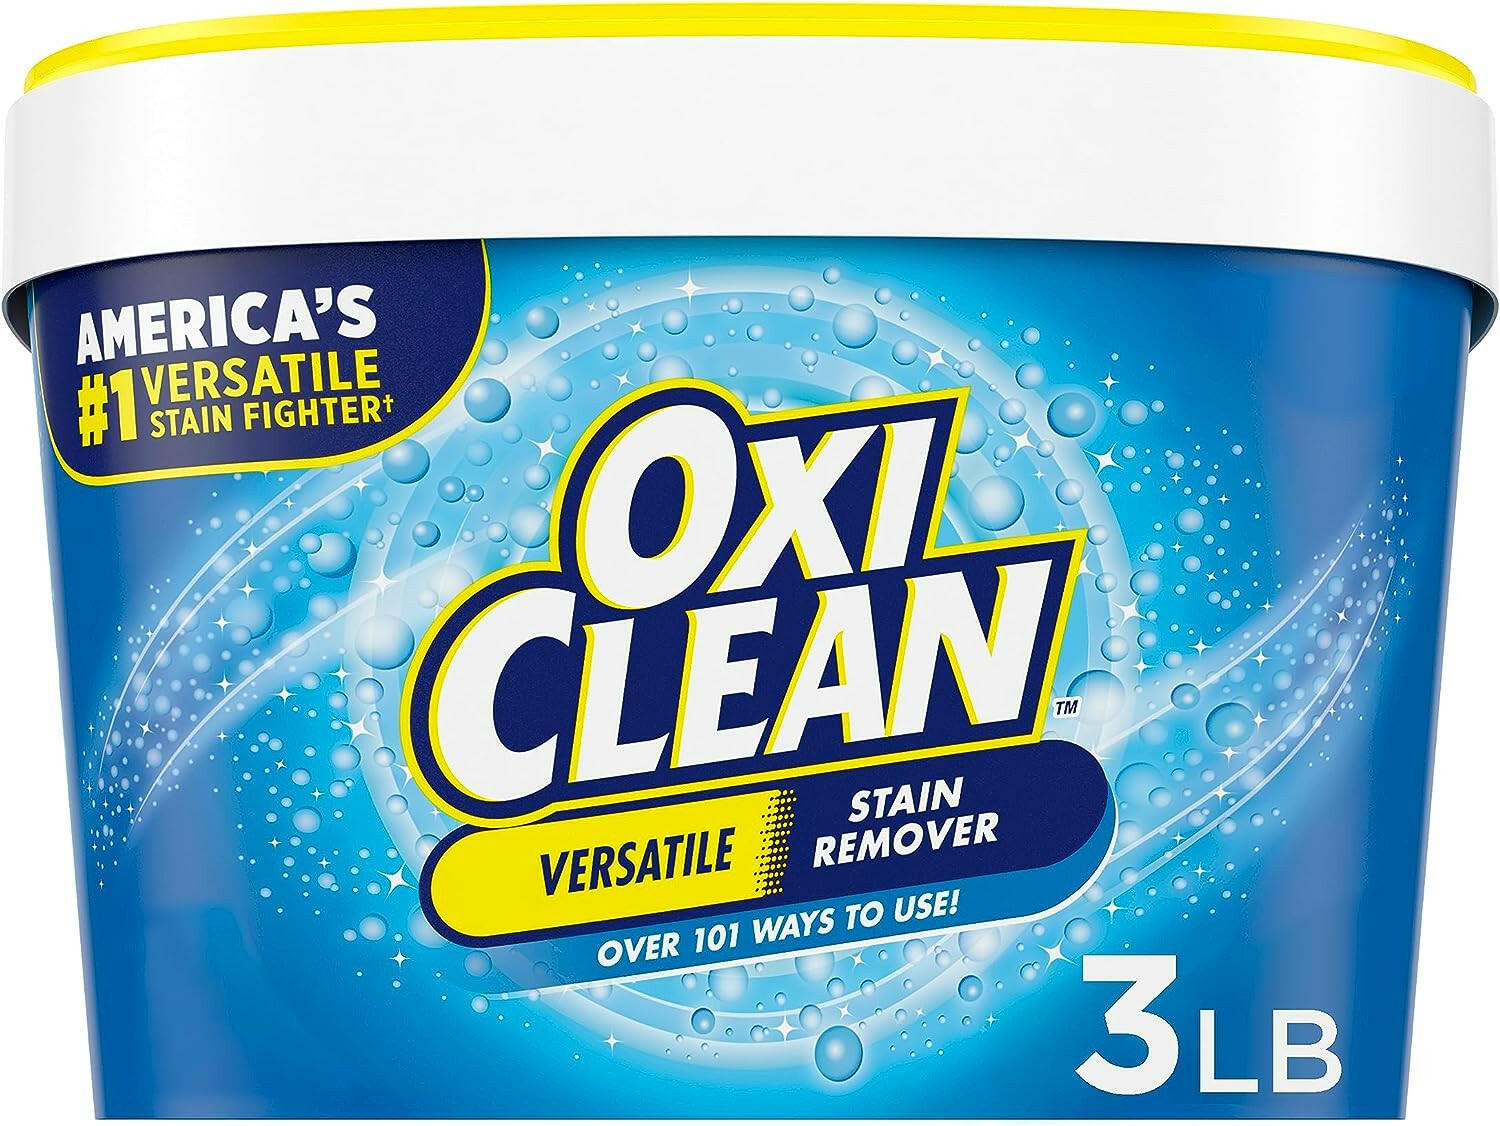 OxiClean Versatile Stain Remover Powder, 3 lb.